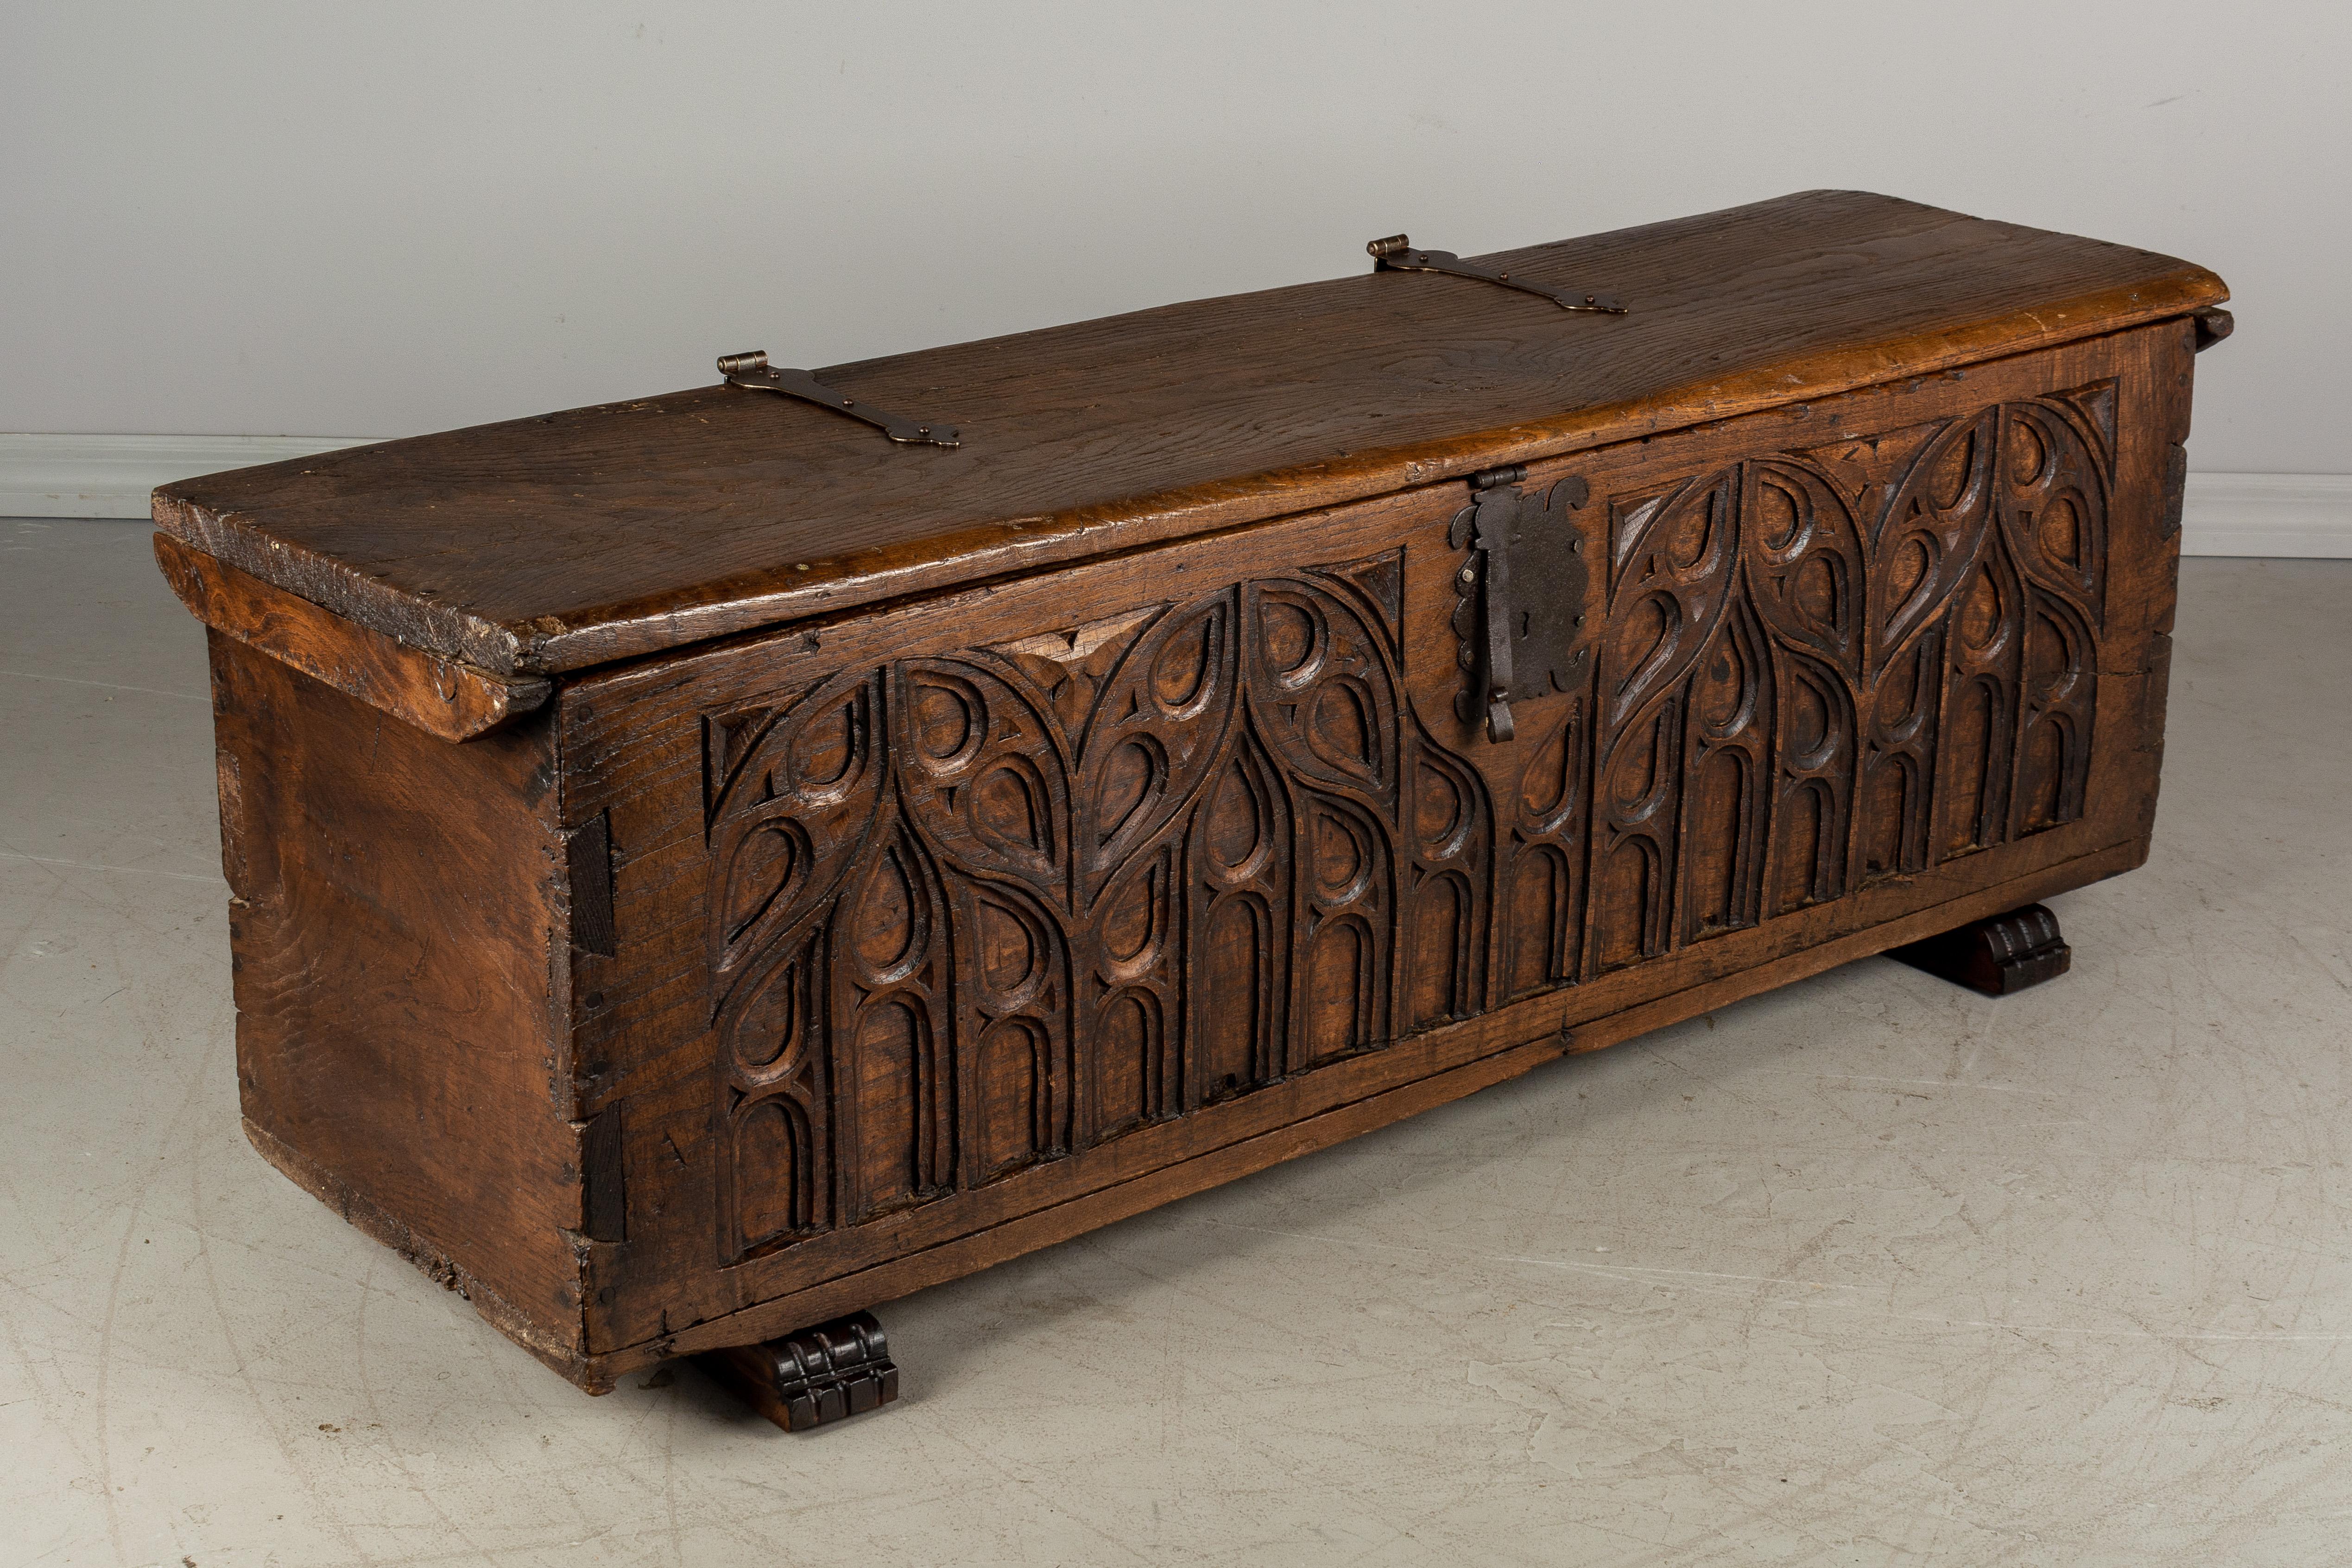 Hand-Carved 18th Century French Gothic Style Blanket Chest or Bench